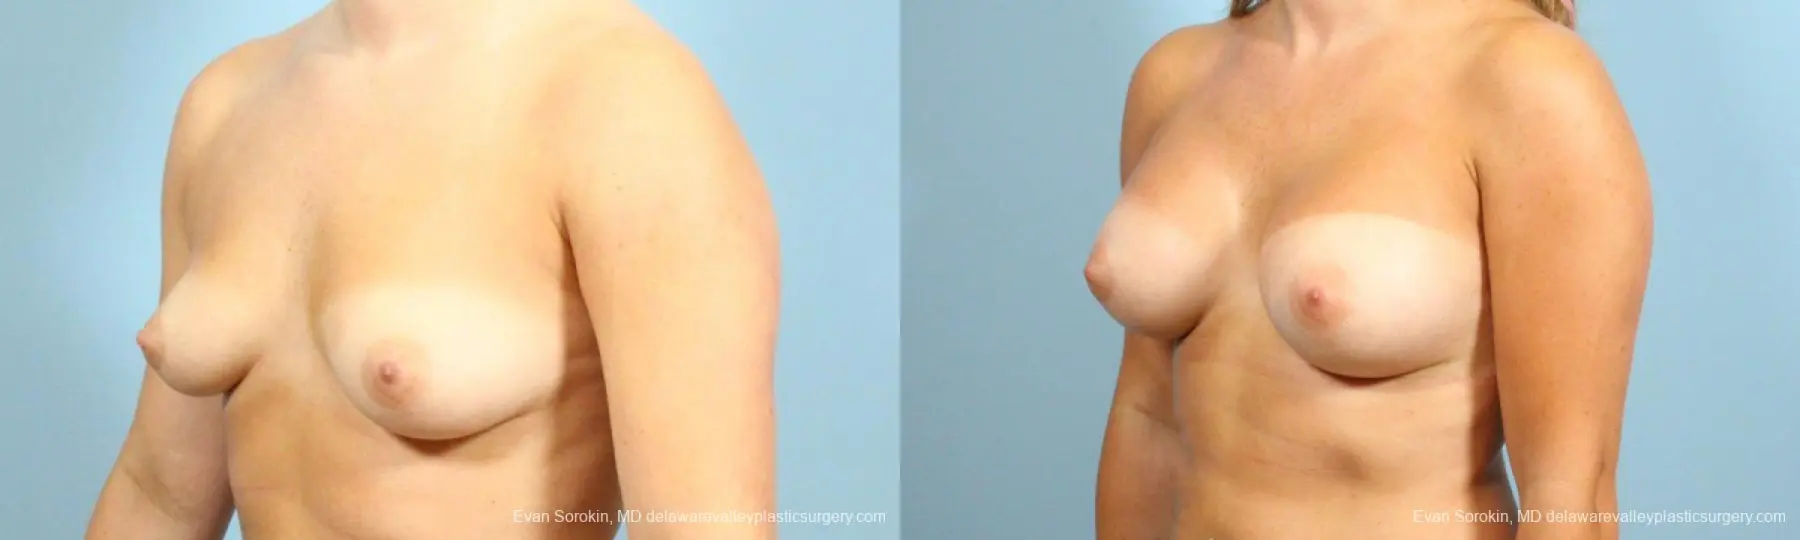 Philadelphia Breast Augmentation 8650 - Before and After 3